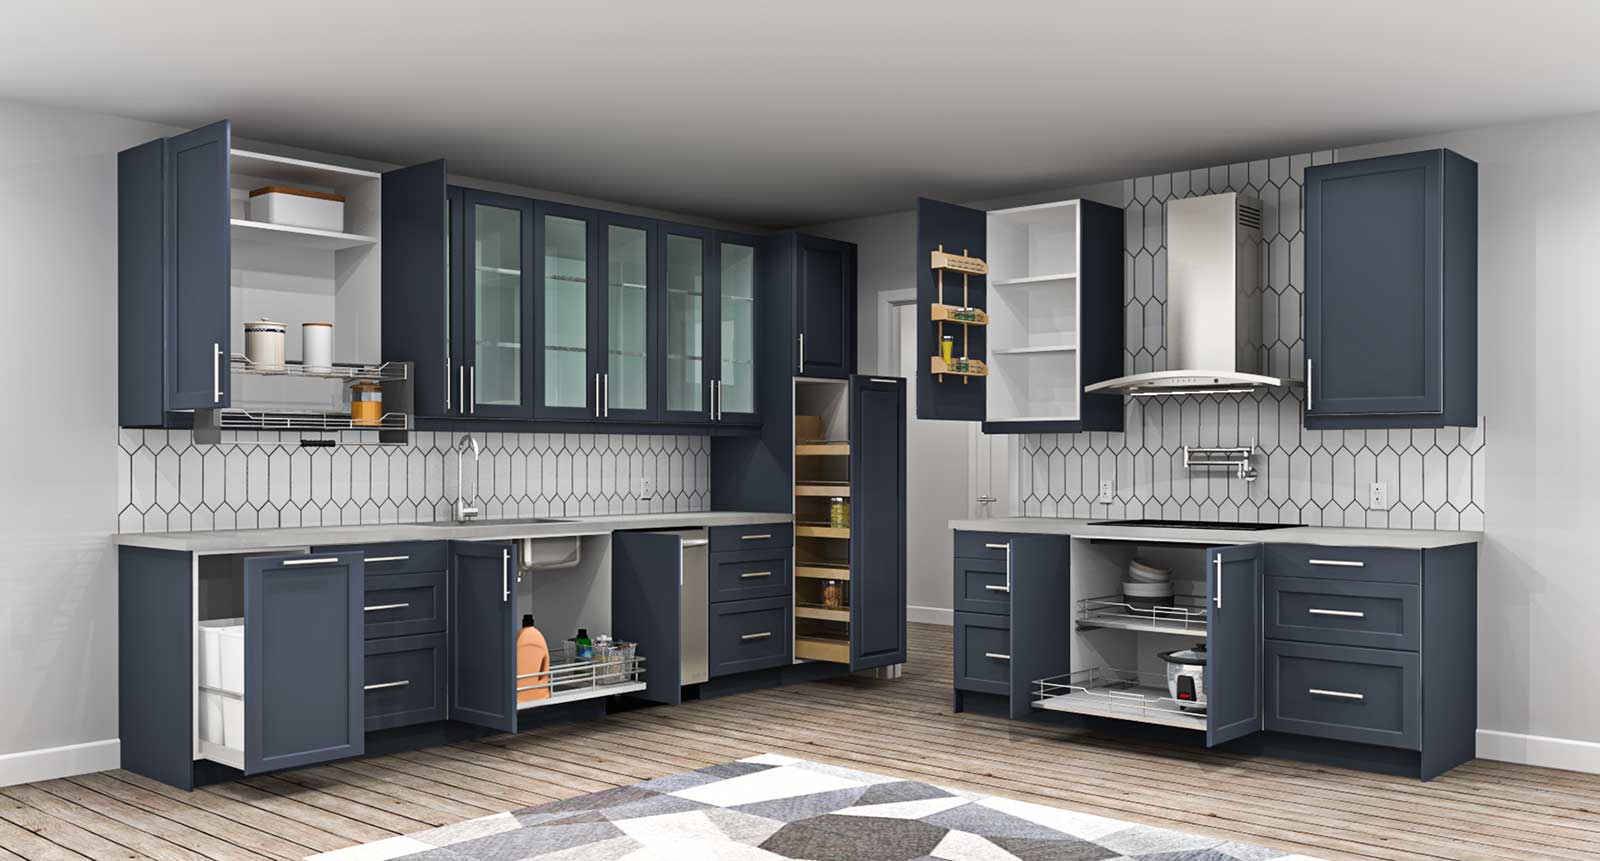 https://inspiredkitchendesign.com/wp-content/uploads/2023/03/1-an-ikea-kitchen-designed-from-the-inside-out.jpg